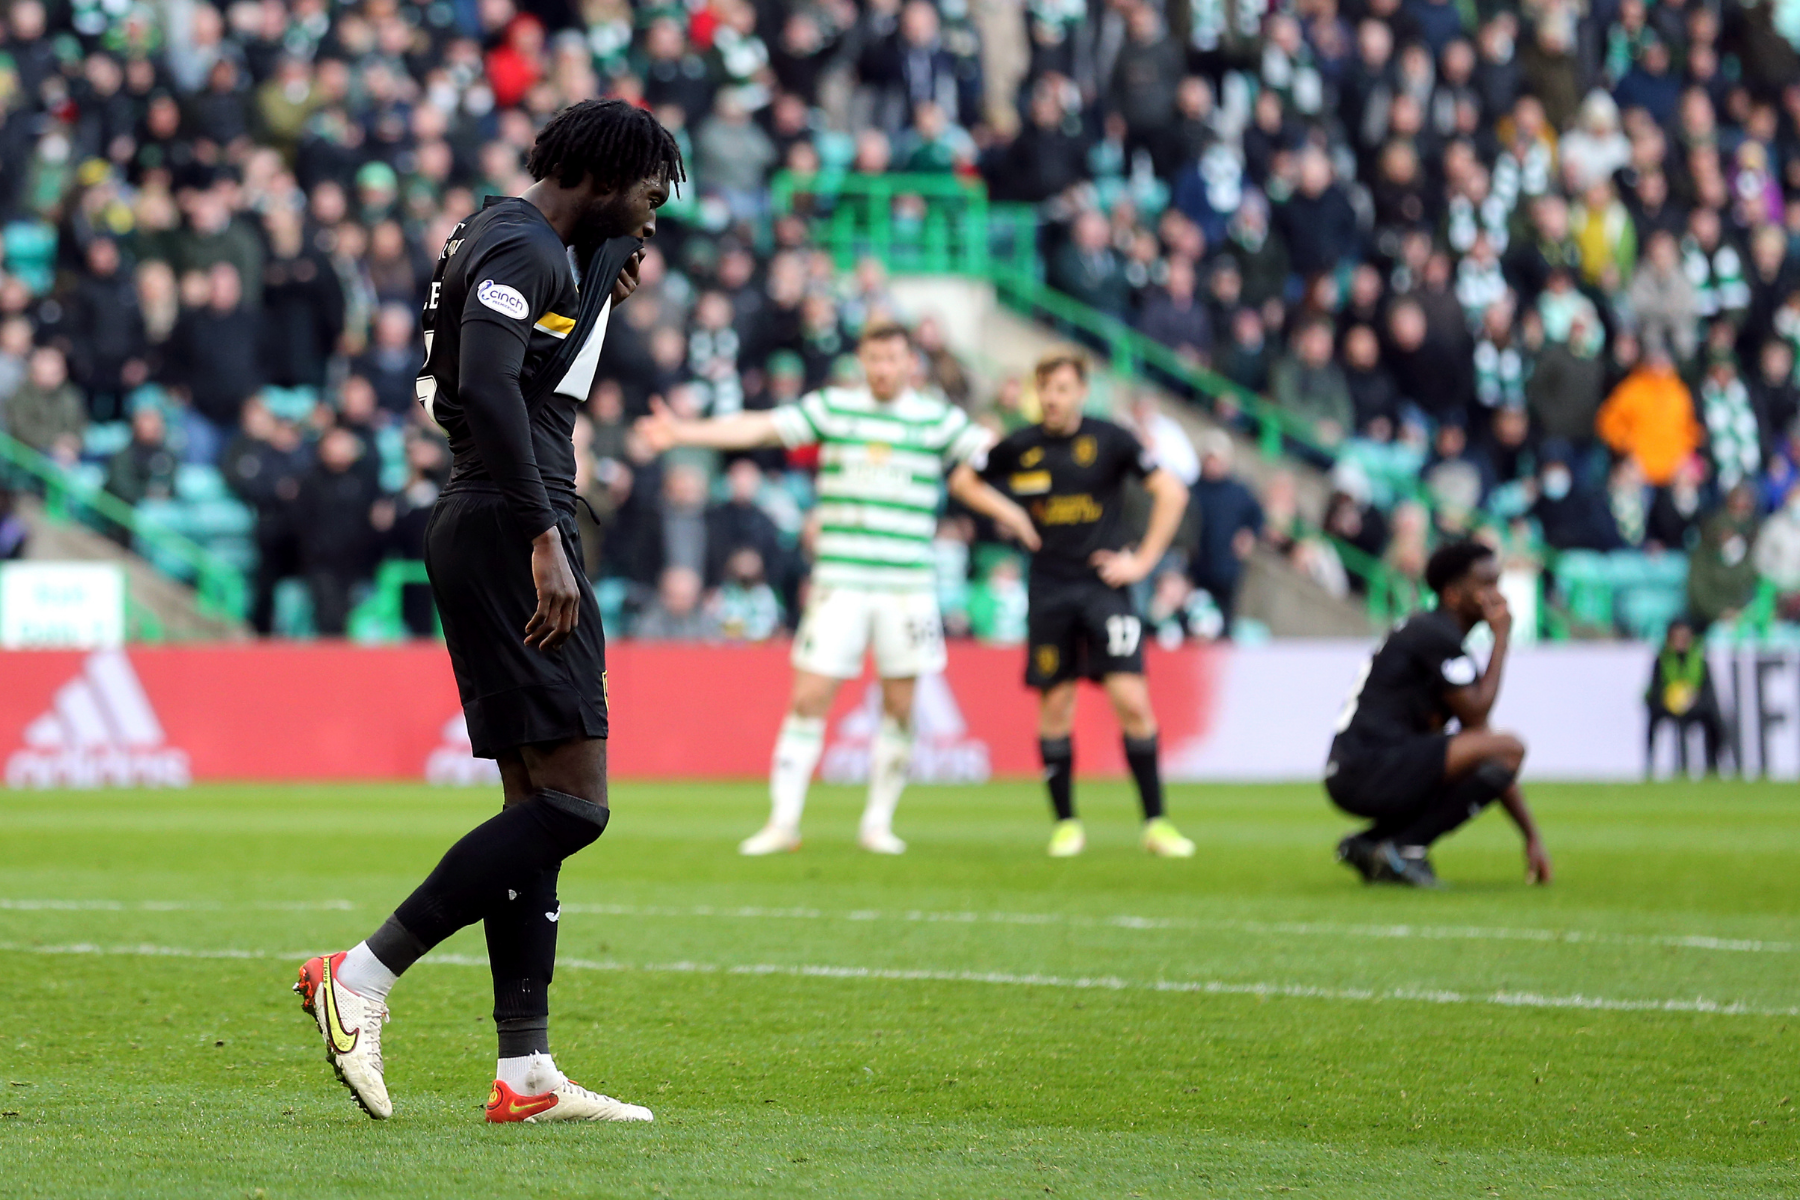 Celtic studying Parkhead CCTV footage after alleged racist abuse of Livingston defender Ayo Obileye